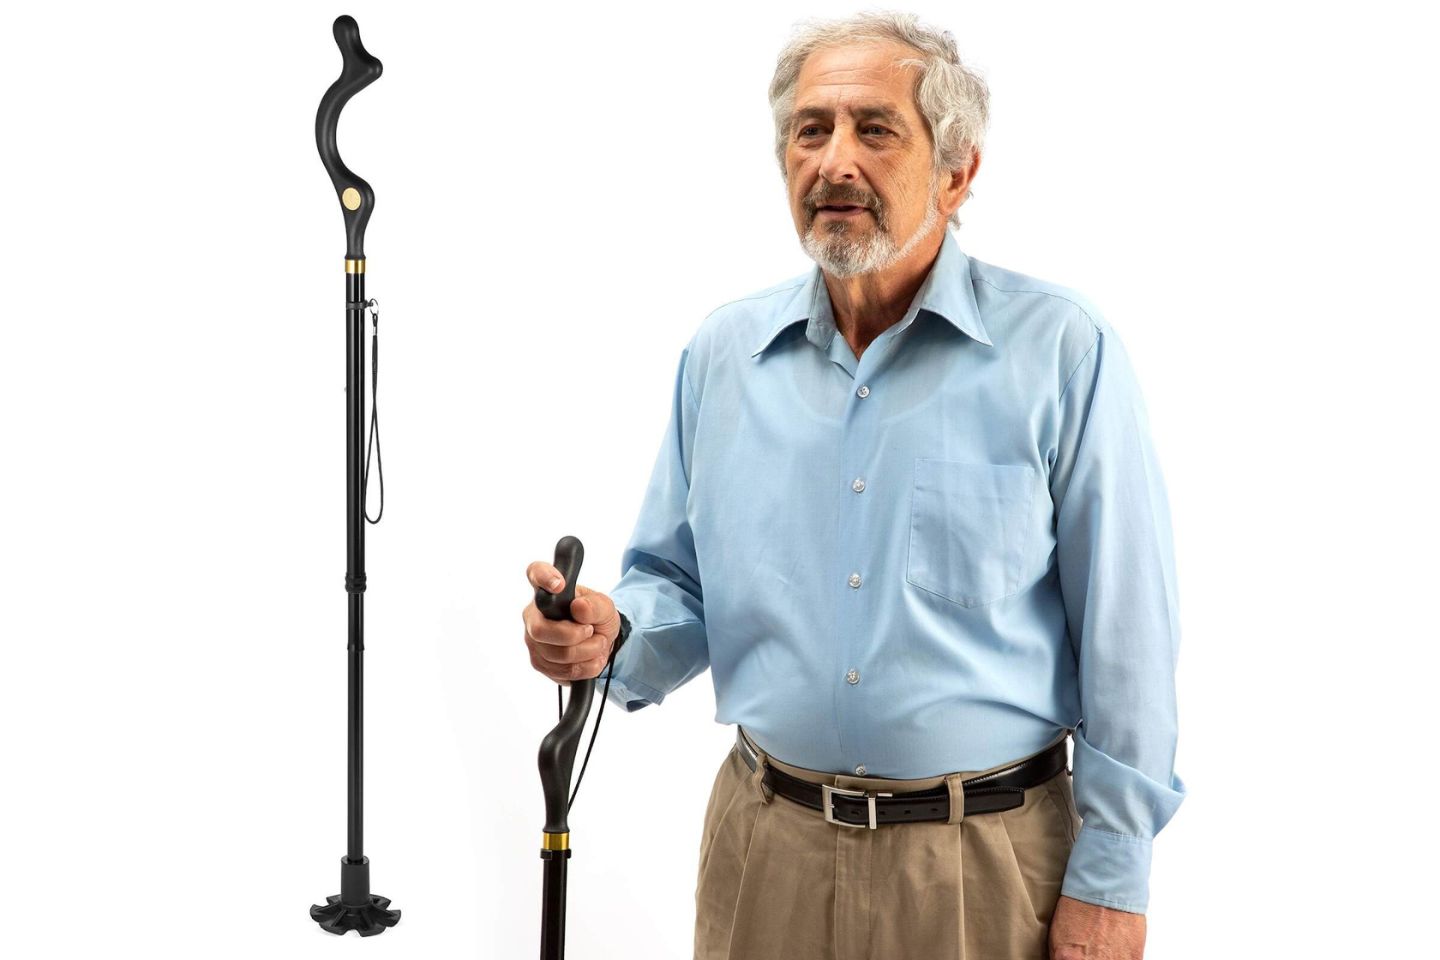 Carex Soft Grip Folding Cane - Foldable Walking Cane For Men and